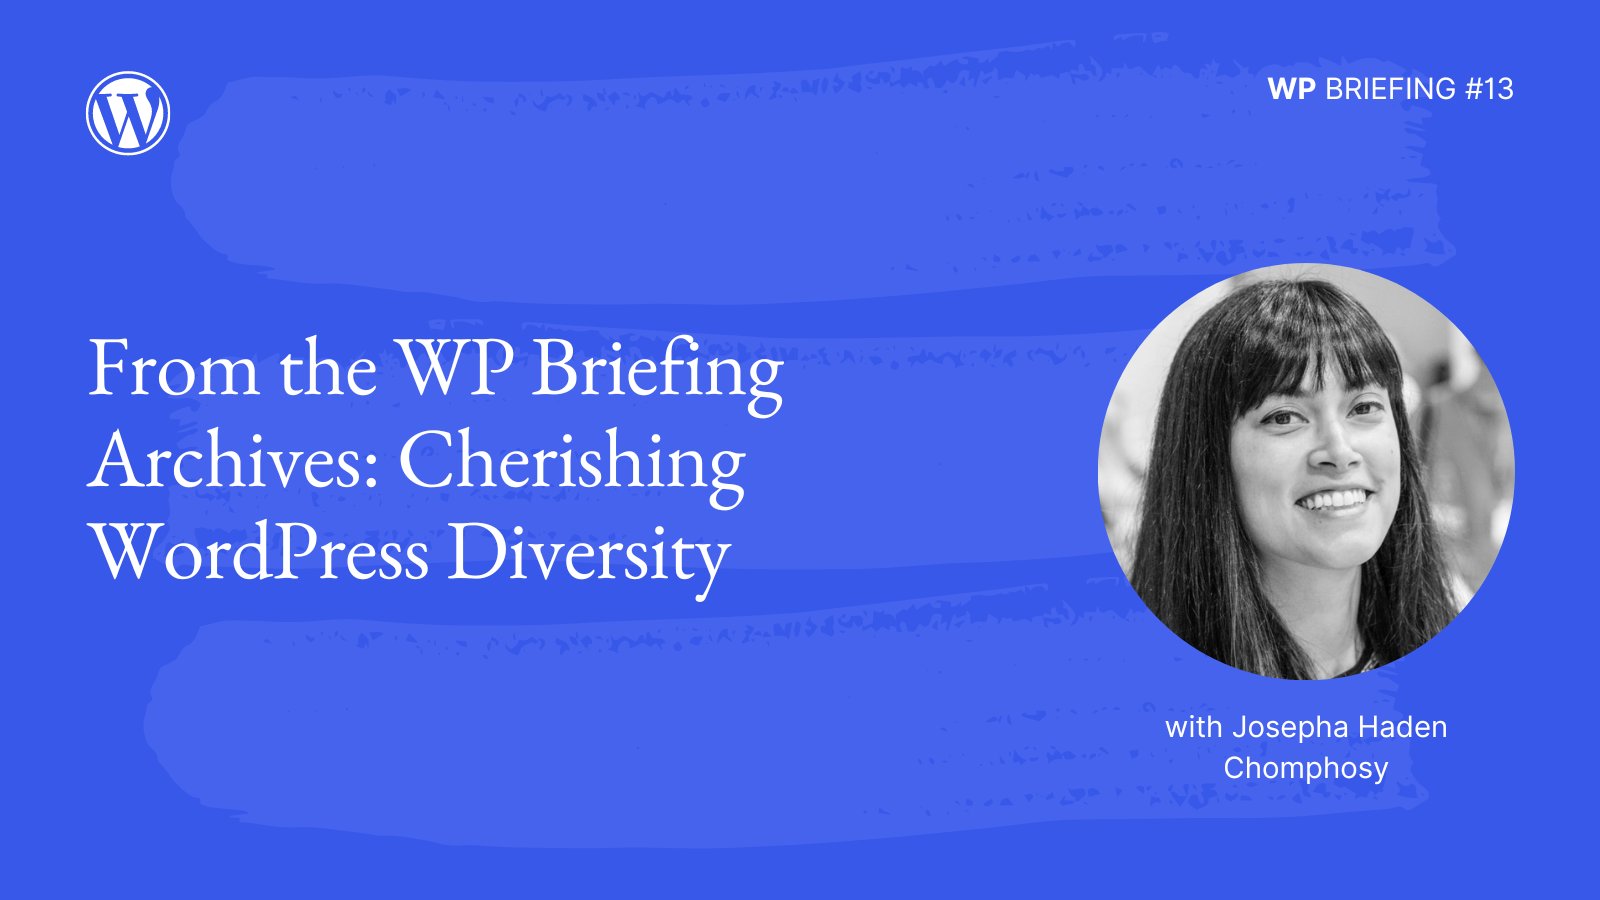 Blue background image with light blue paint brush stroke detail, white WordPress logo, and black & white image of Josepha Haden Chomphosy. Text "WP Briefing # 13. From the WP Briefing Archives: Cherishing WordPress Diversity." 